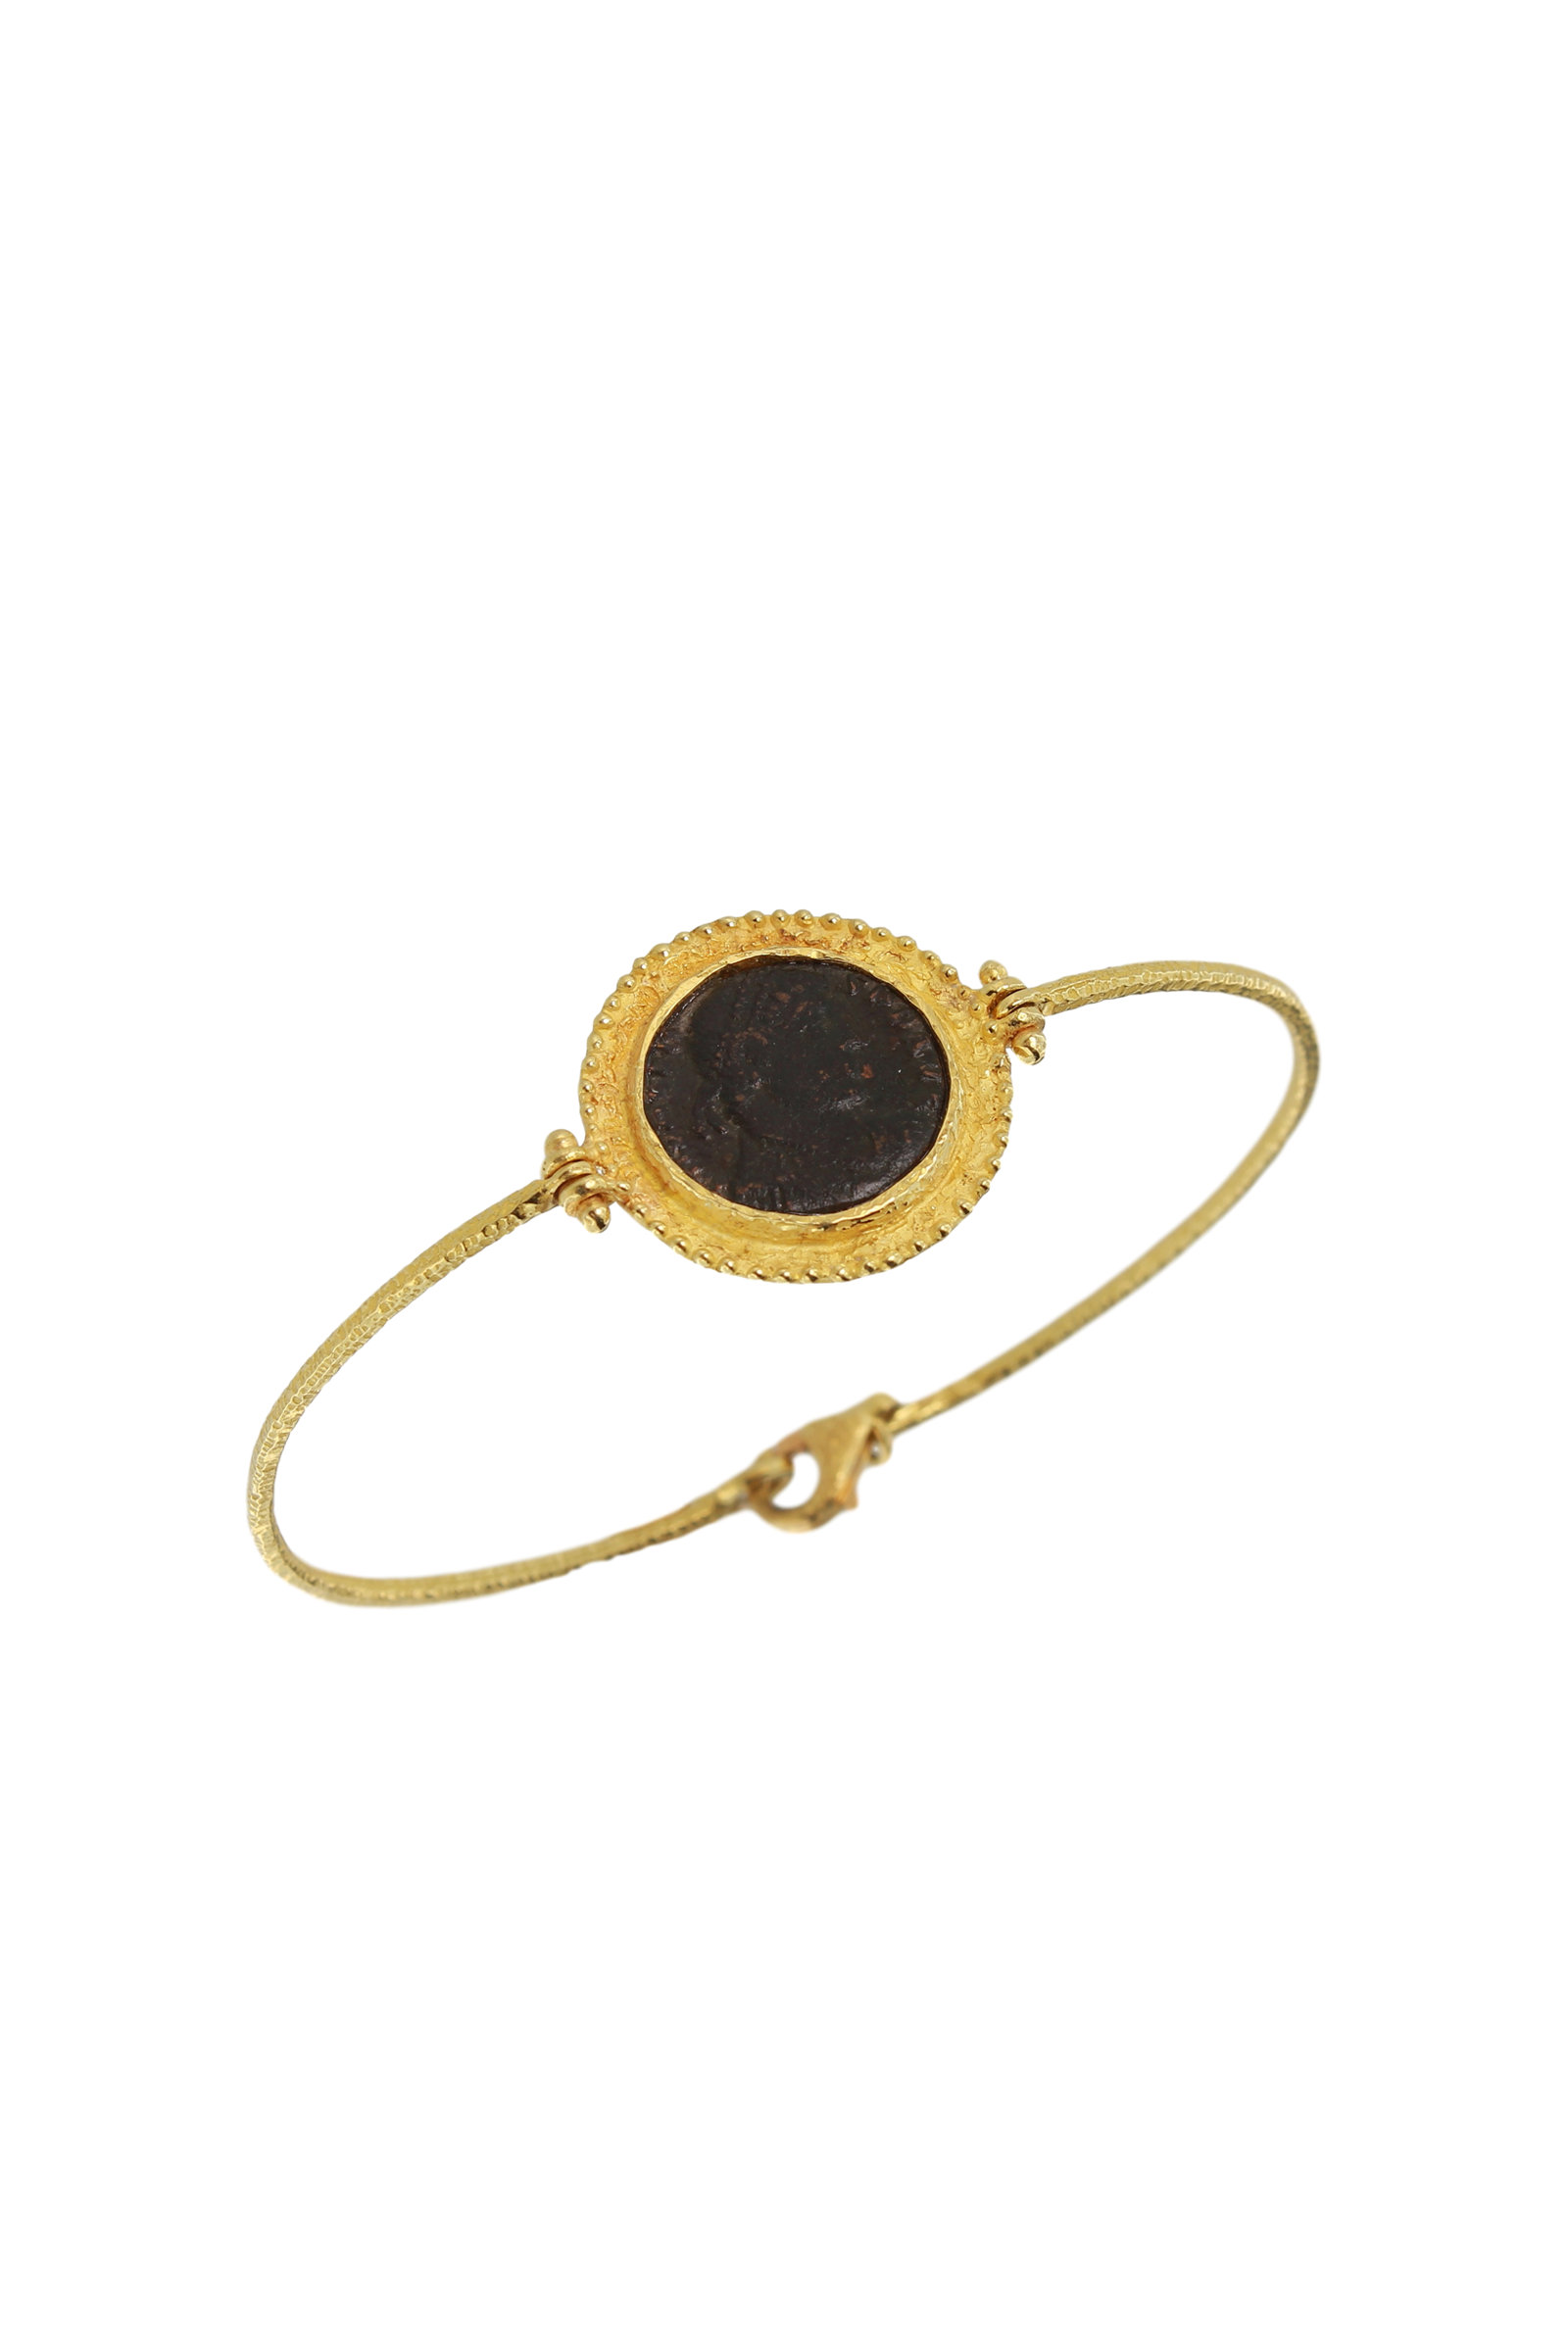 SB277A-18-Kt-Yellow-Gold-Bracelet-with-Roman-Coin-1